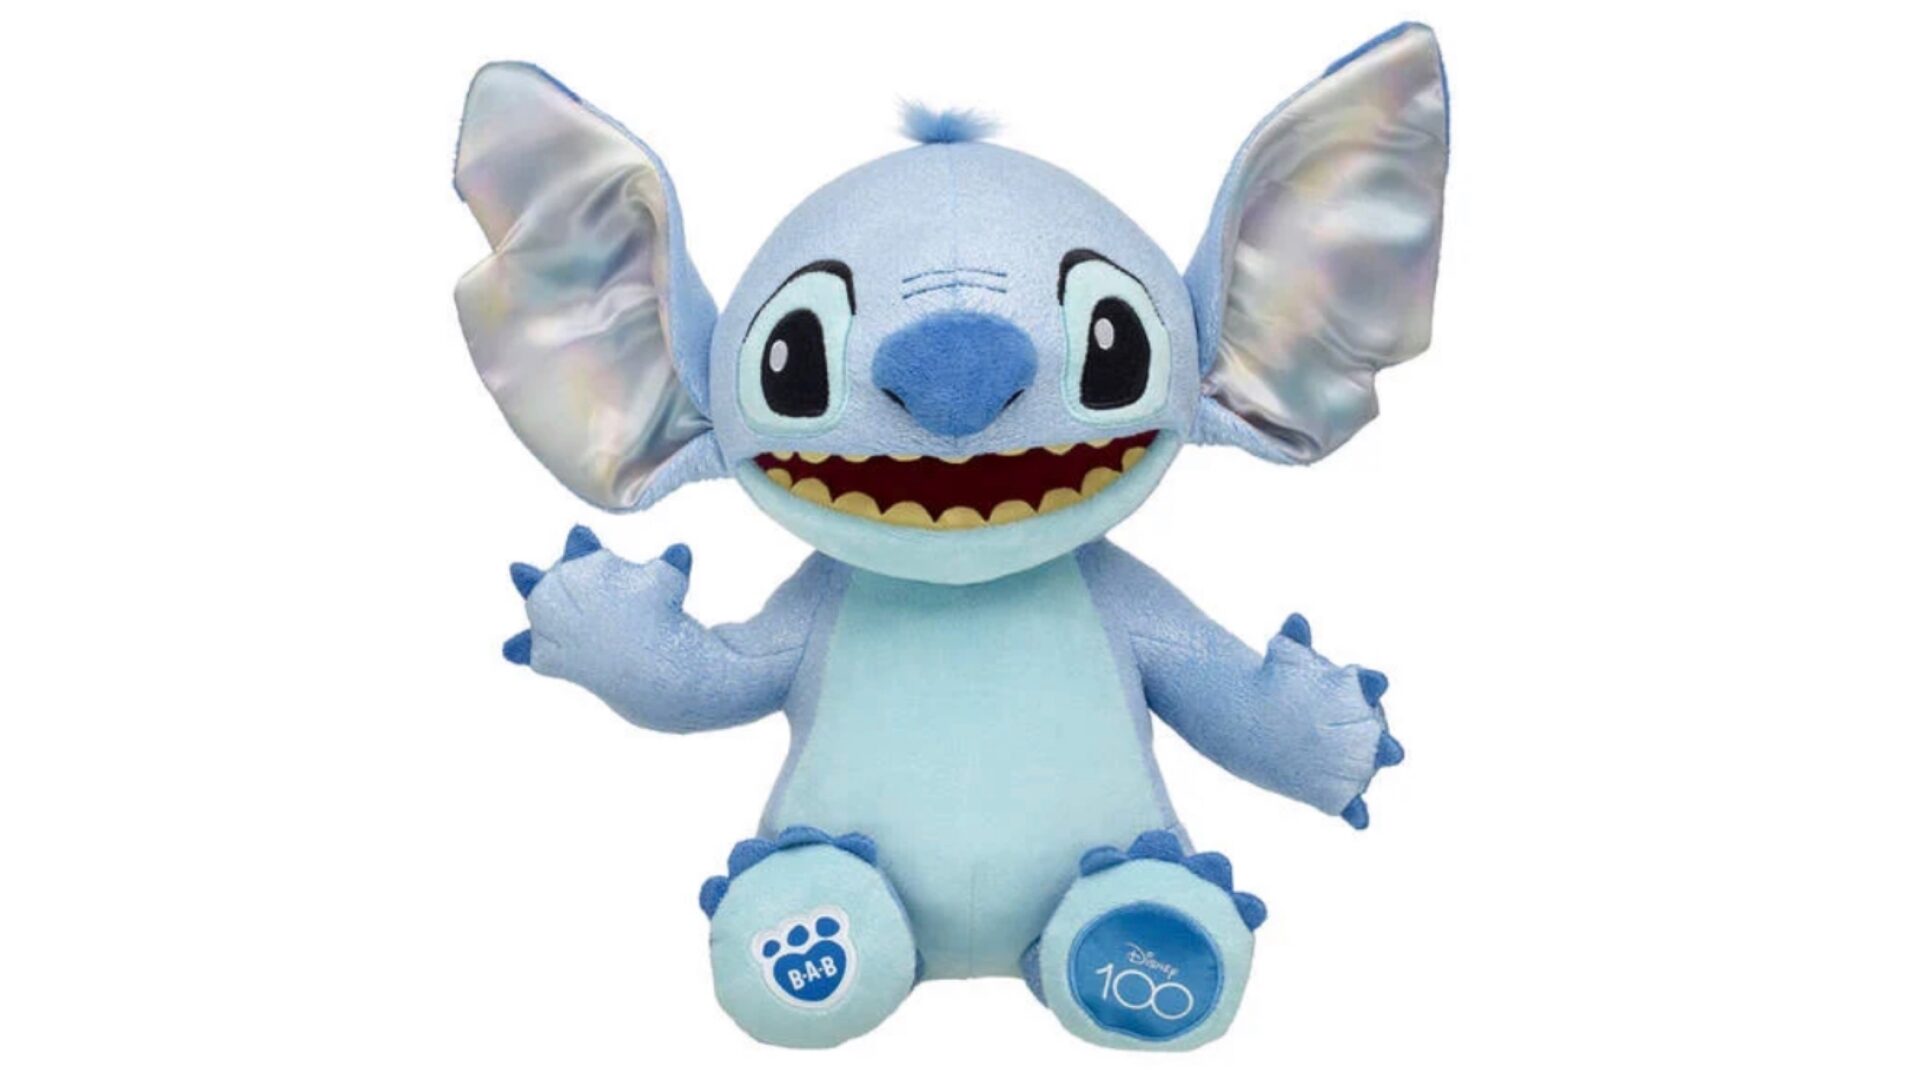 New Disney100 Stitch Build A Bear Available Now!